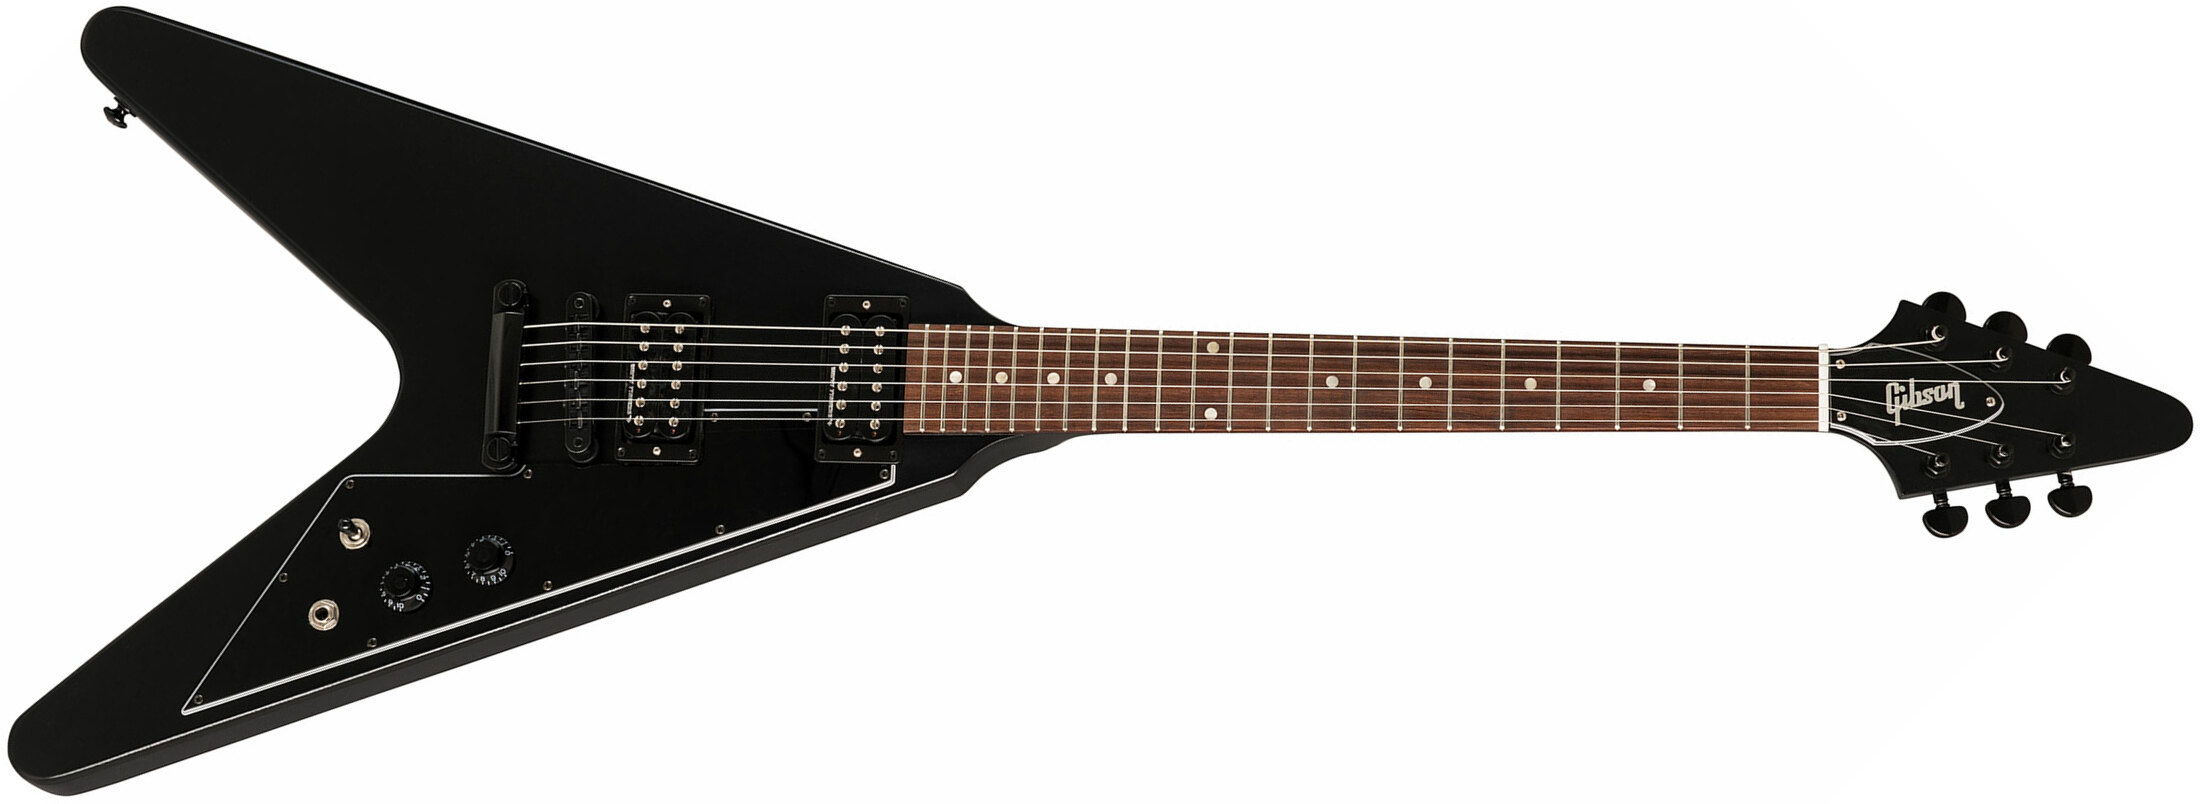 Gibson Flying V Tribute 2019 Hh Ht Rw - Satin Ebony - Metal electric guitar - Main picture